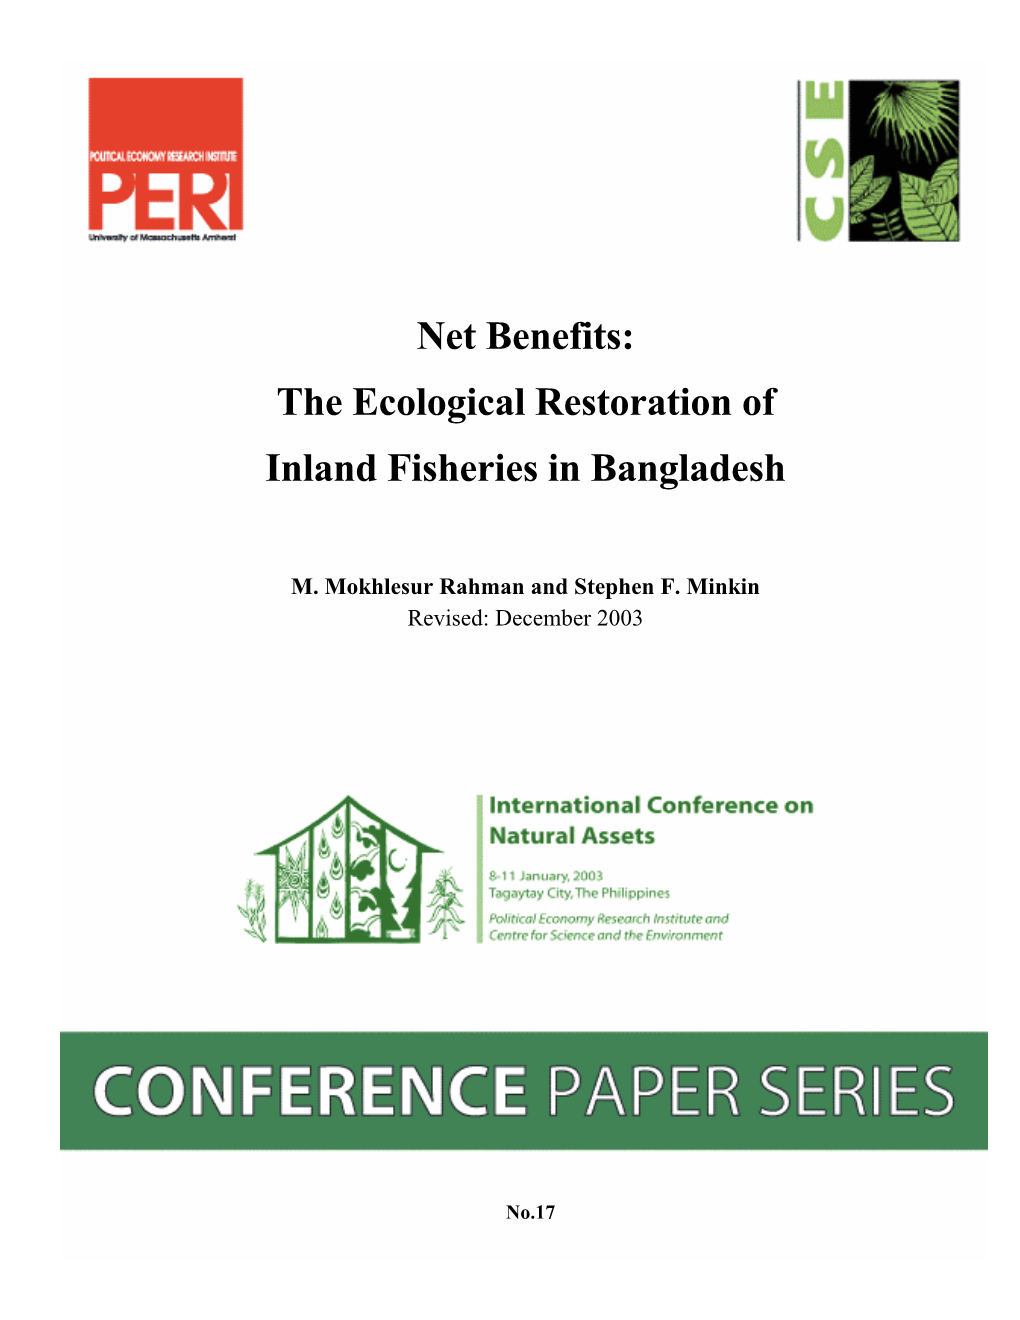 The Ecological Restoration of Inland Fisheries in Bangladesh